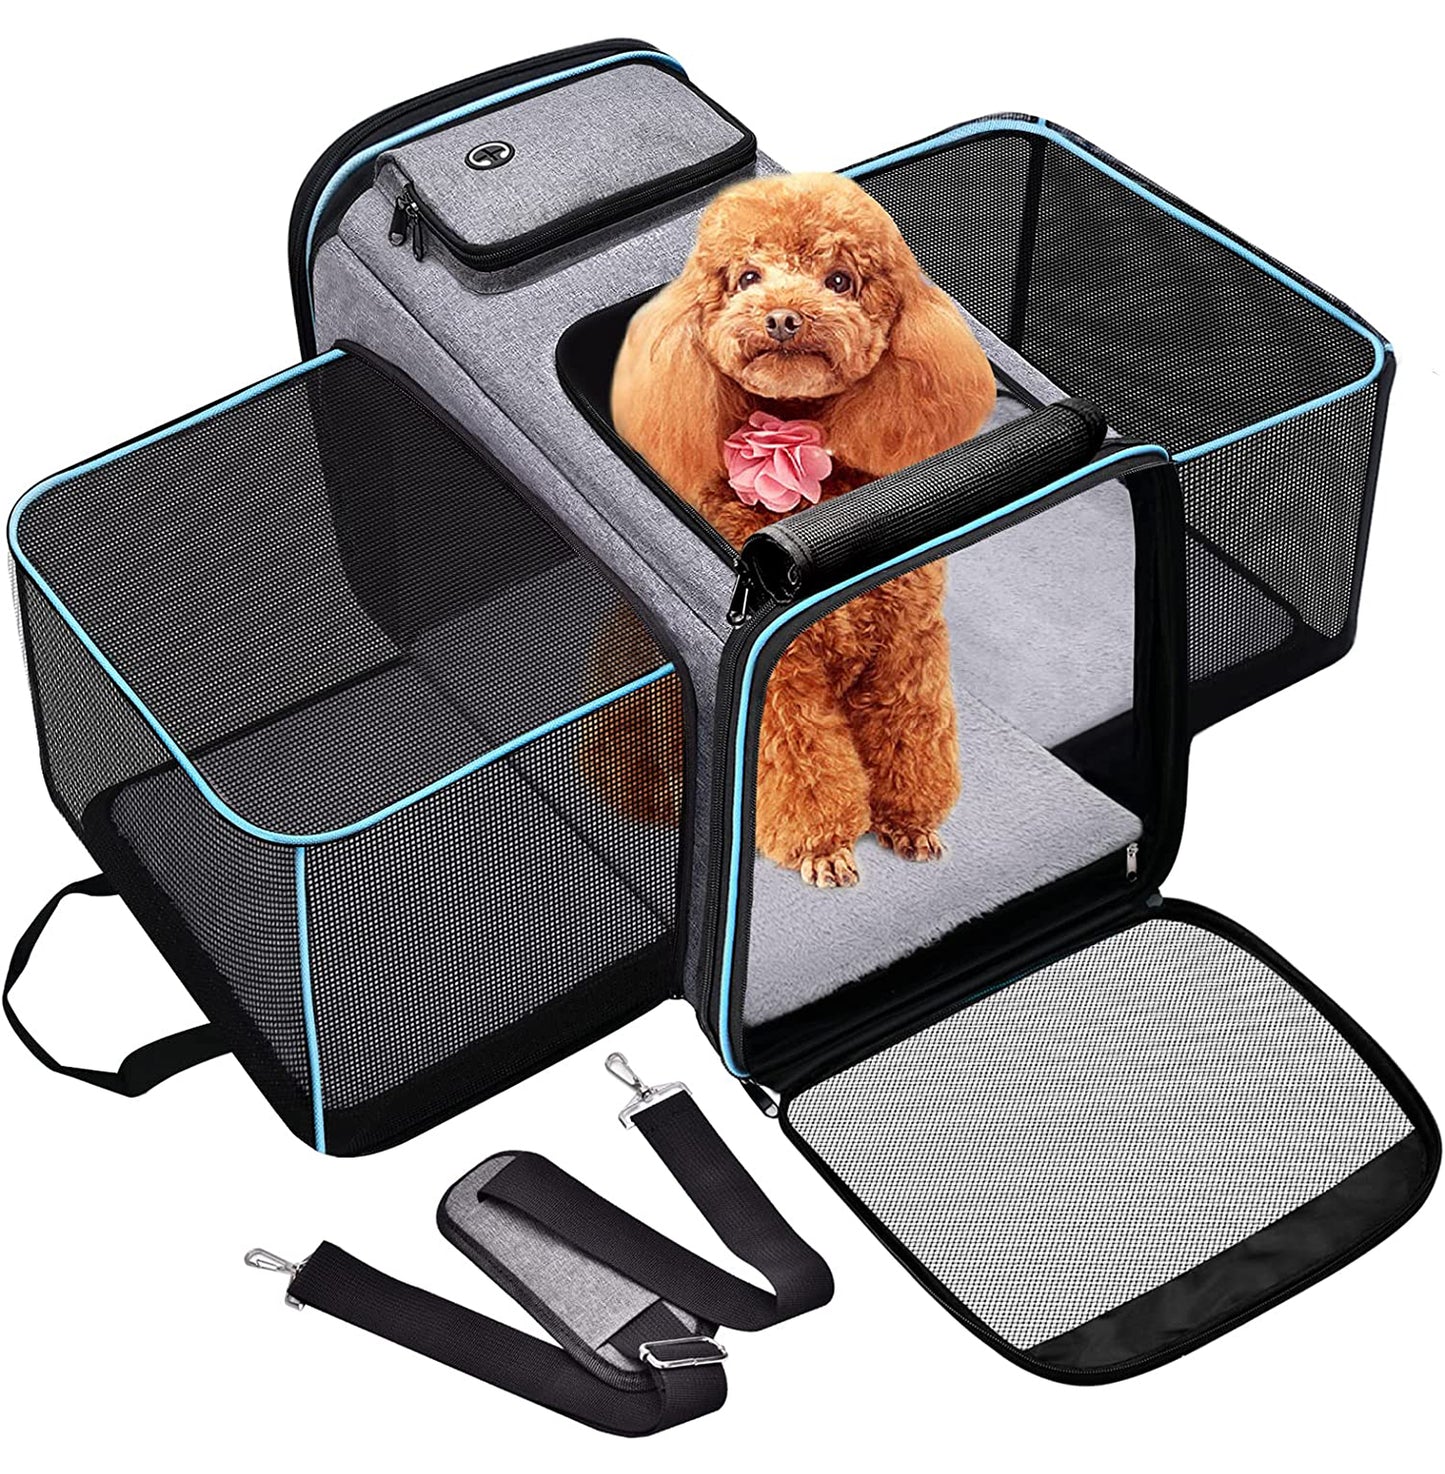  FURHAB Soft-Sided Kennel Pet Carrier Bag 2 Sides Expandable  Airline Approved Carriers for Small Cat Medium Dog, 2 Sides Breathable Mesh  Collapsible Puppy Carrying Case for Travel, up to 16